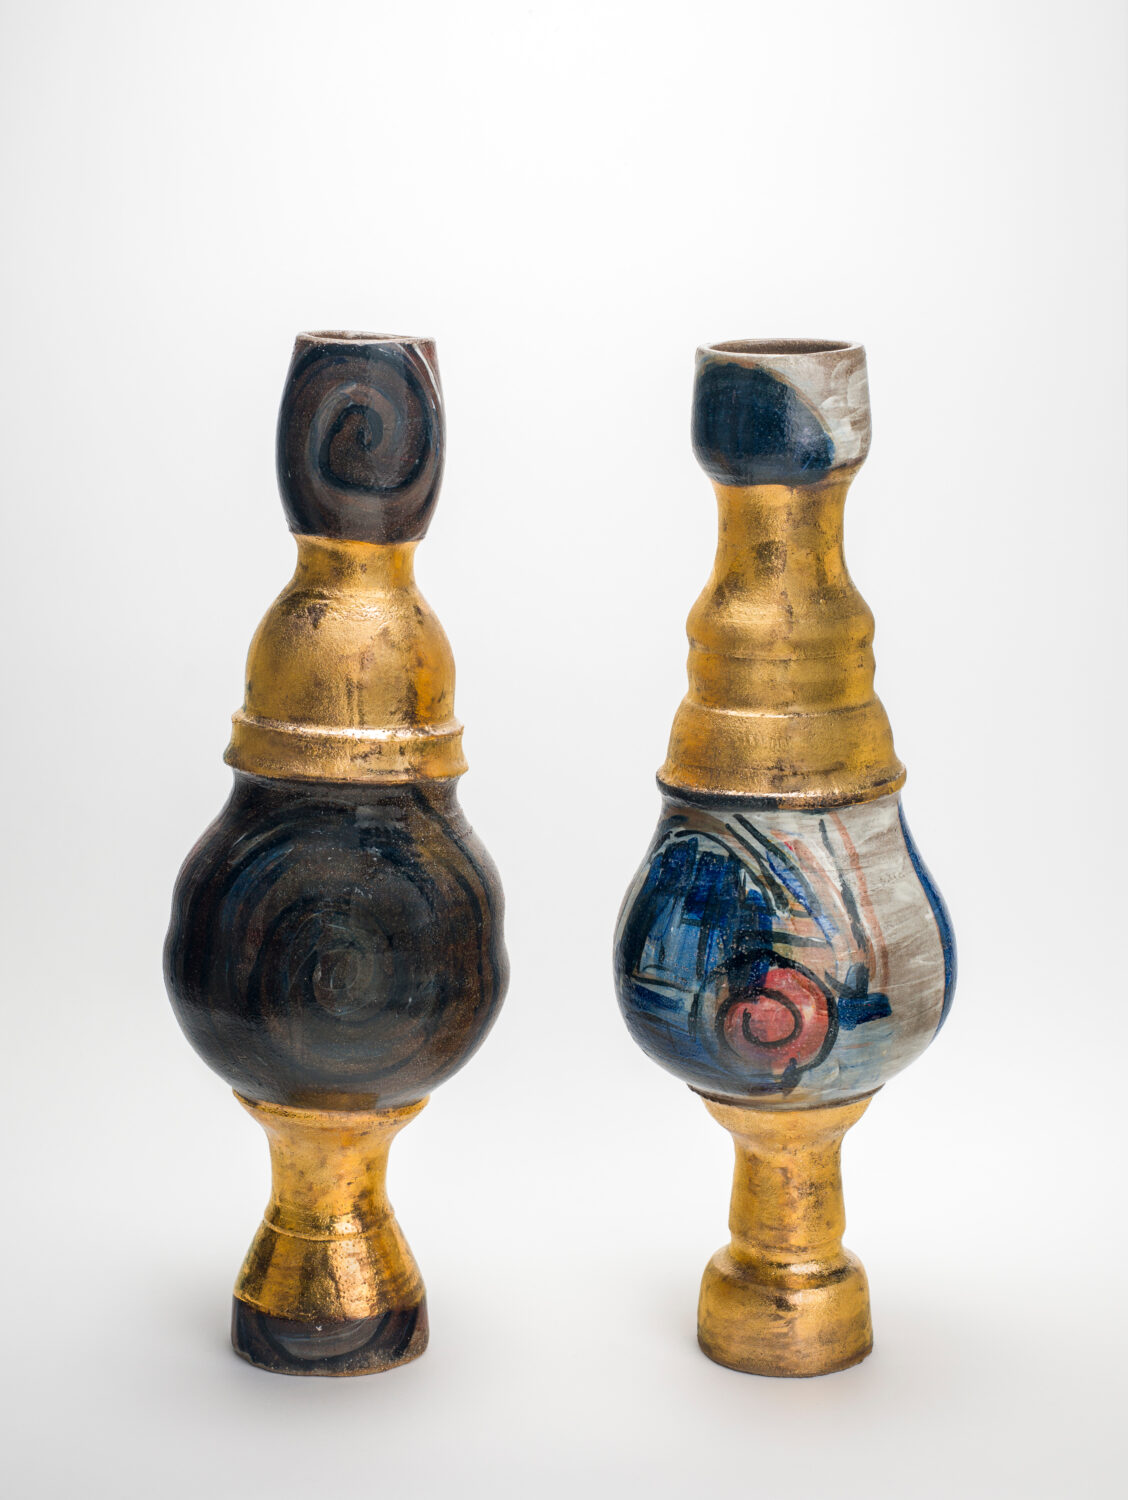 Two sculpted vessels against a white background. Both have gold features but other sections are different colours. One is brown and black and the other is blue, white and pink.